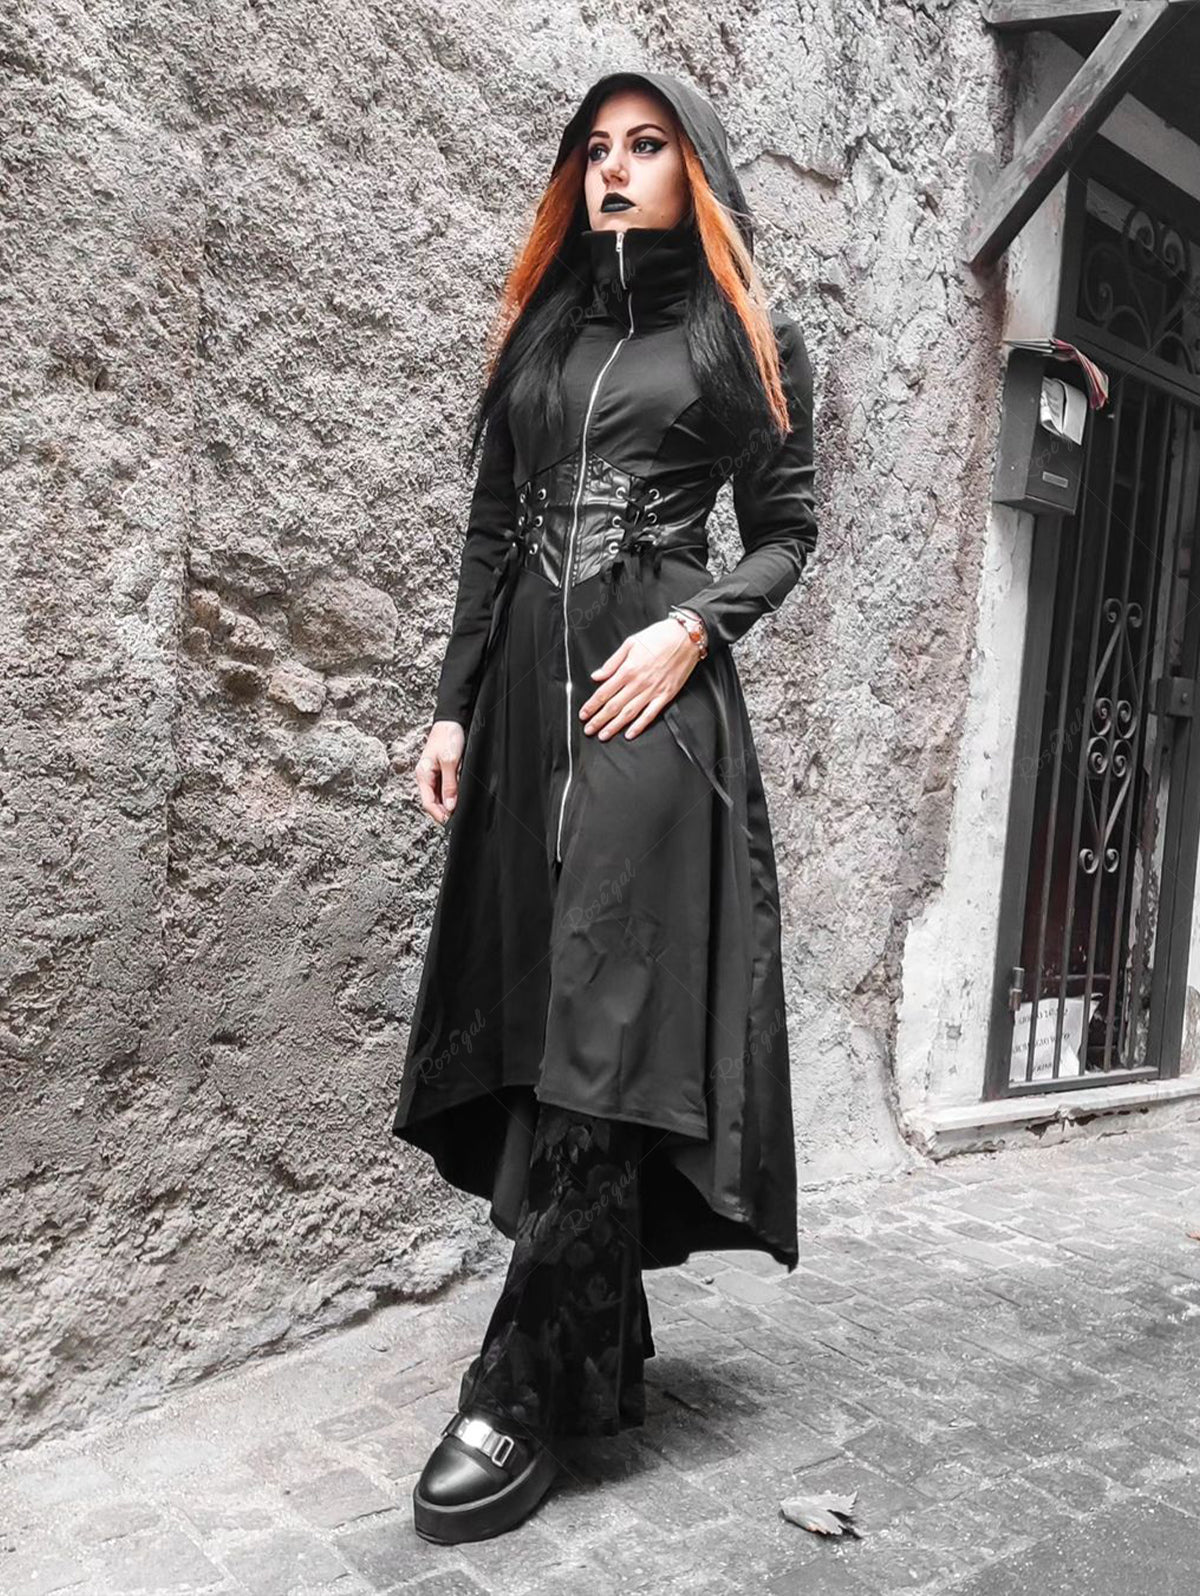 💗Danae_lovecraft Loves💗 Gothic PU Panel Lace Up Zipper Ruched High Low Hooded Long Corset Coat